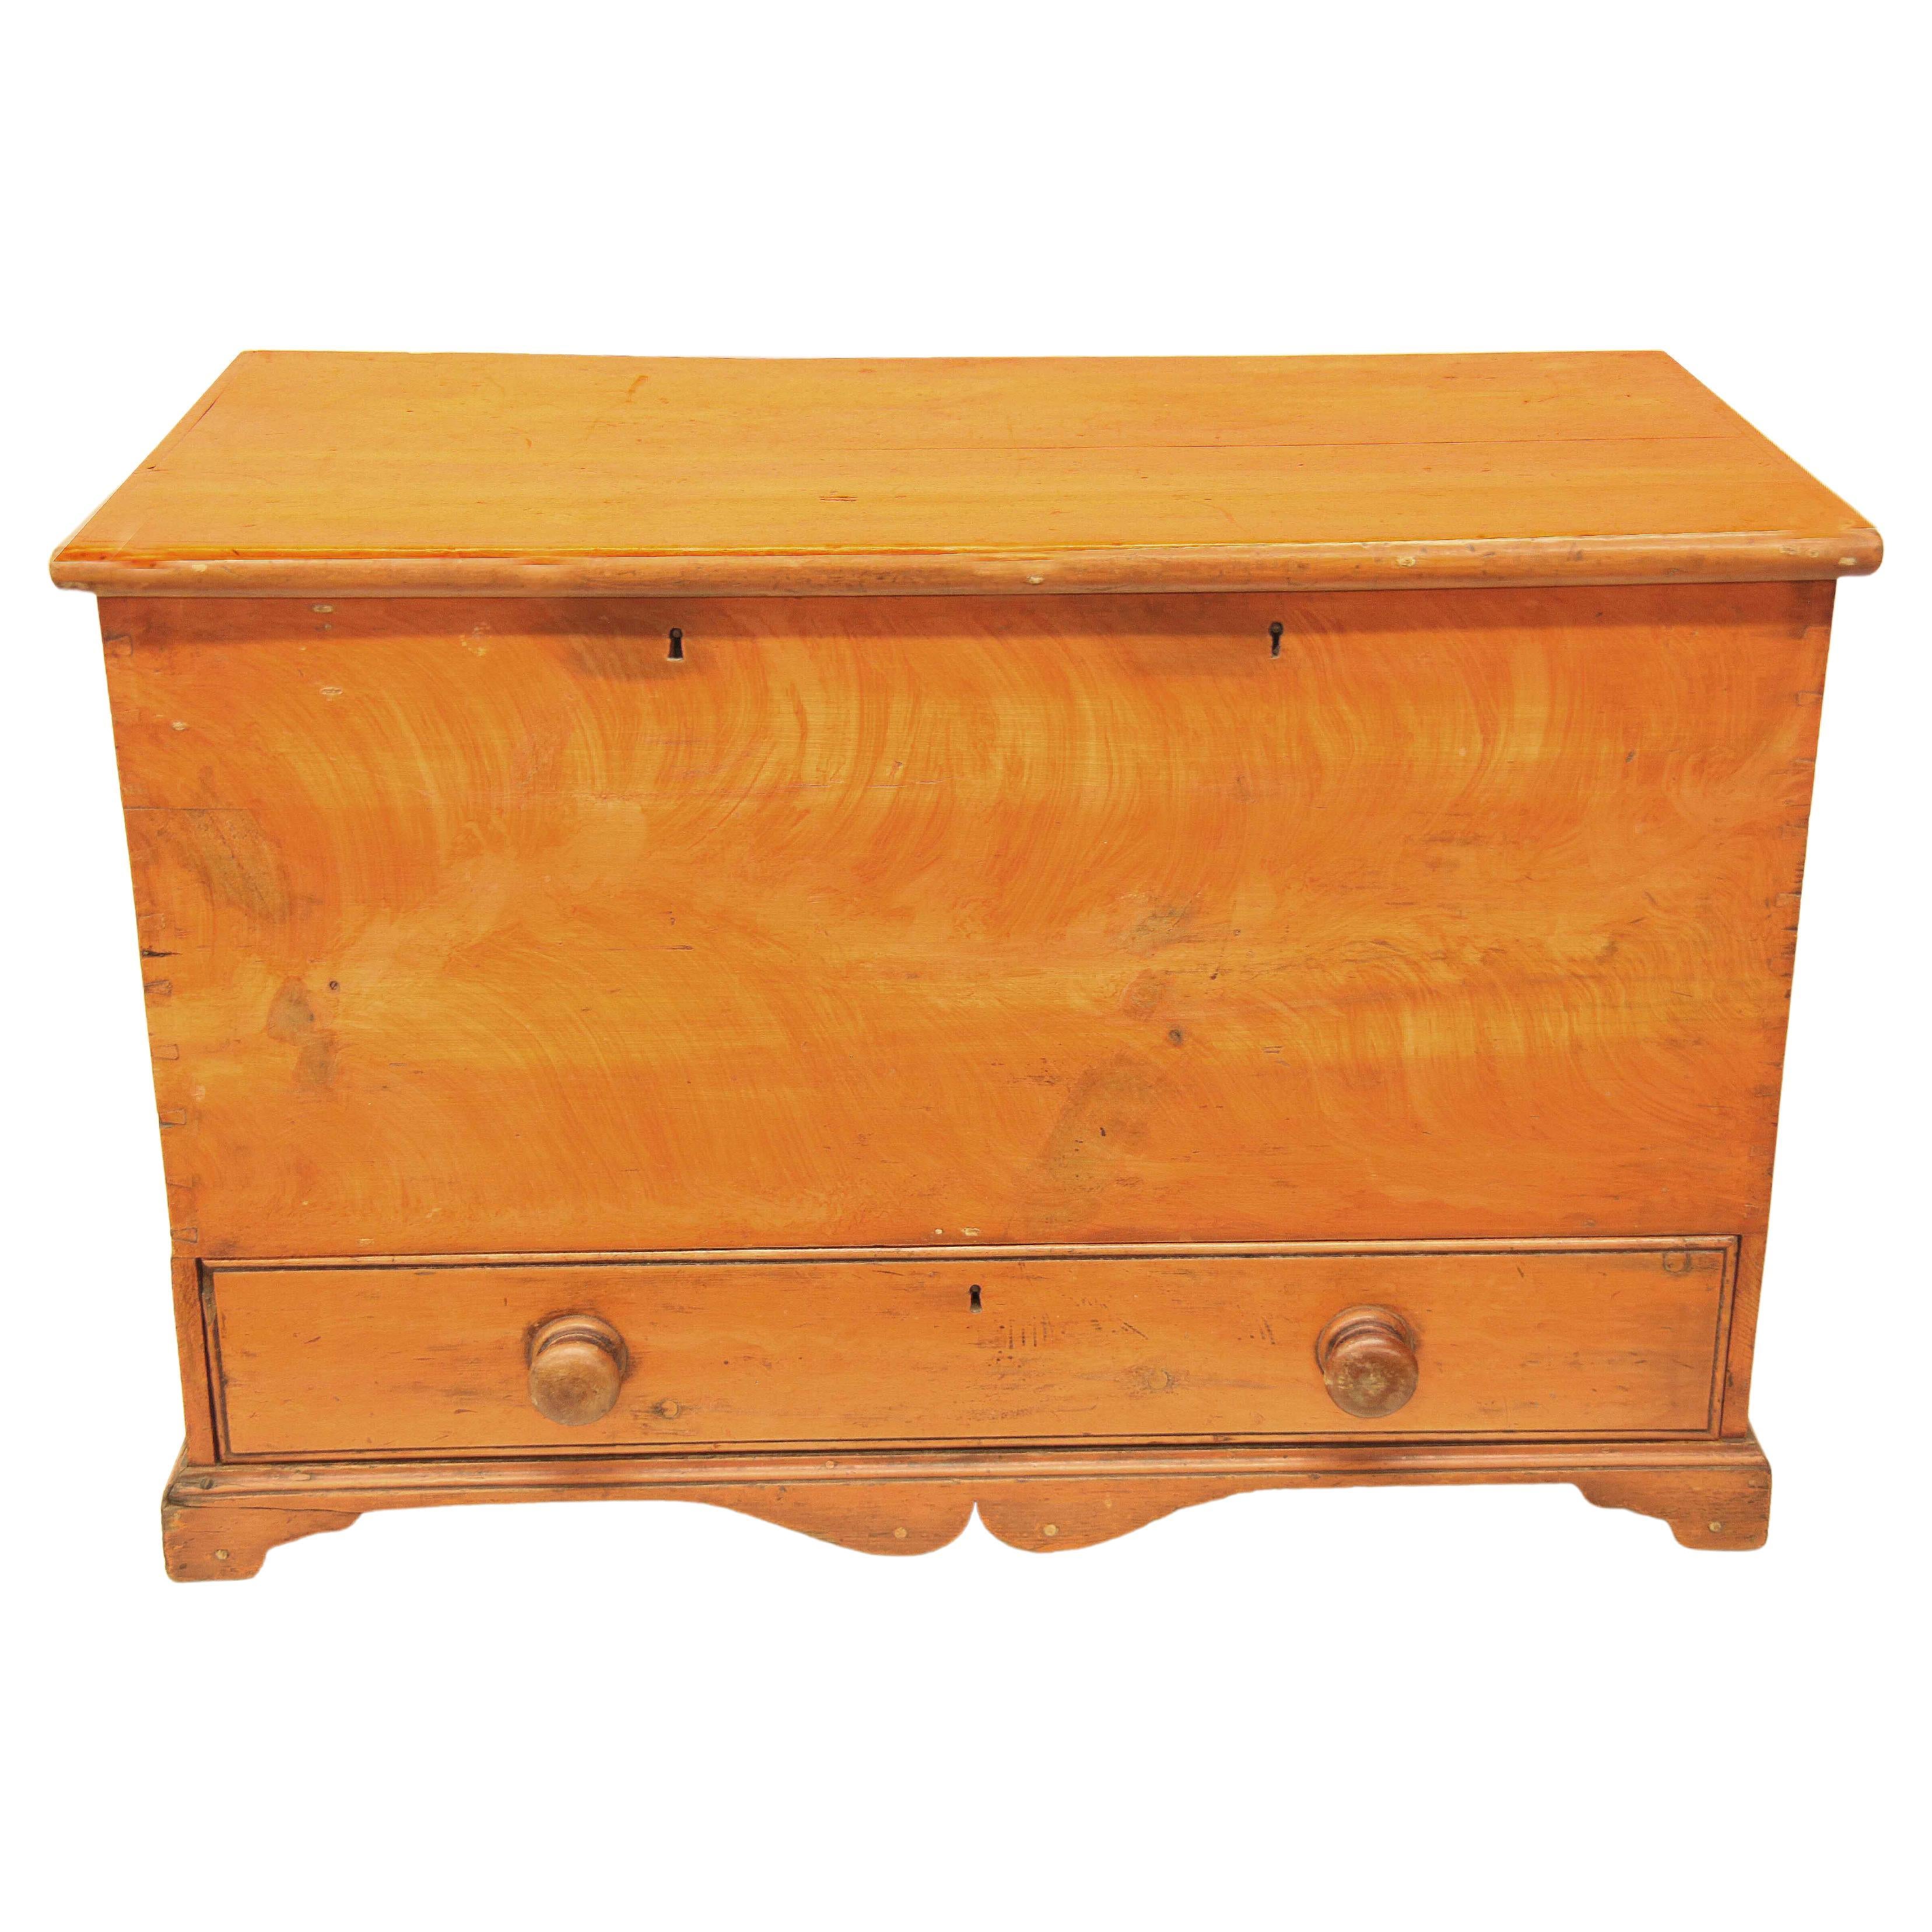 English Painted Blanket Chest